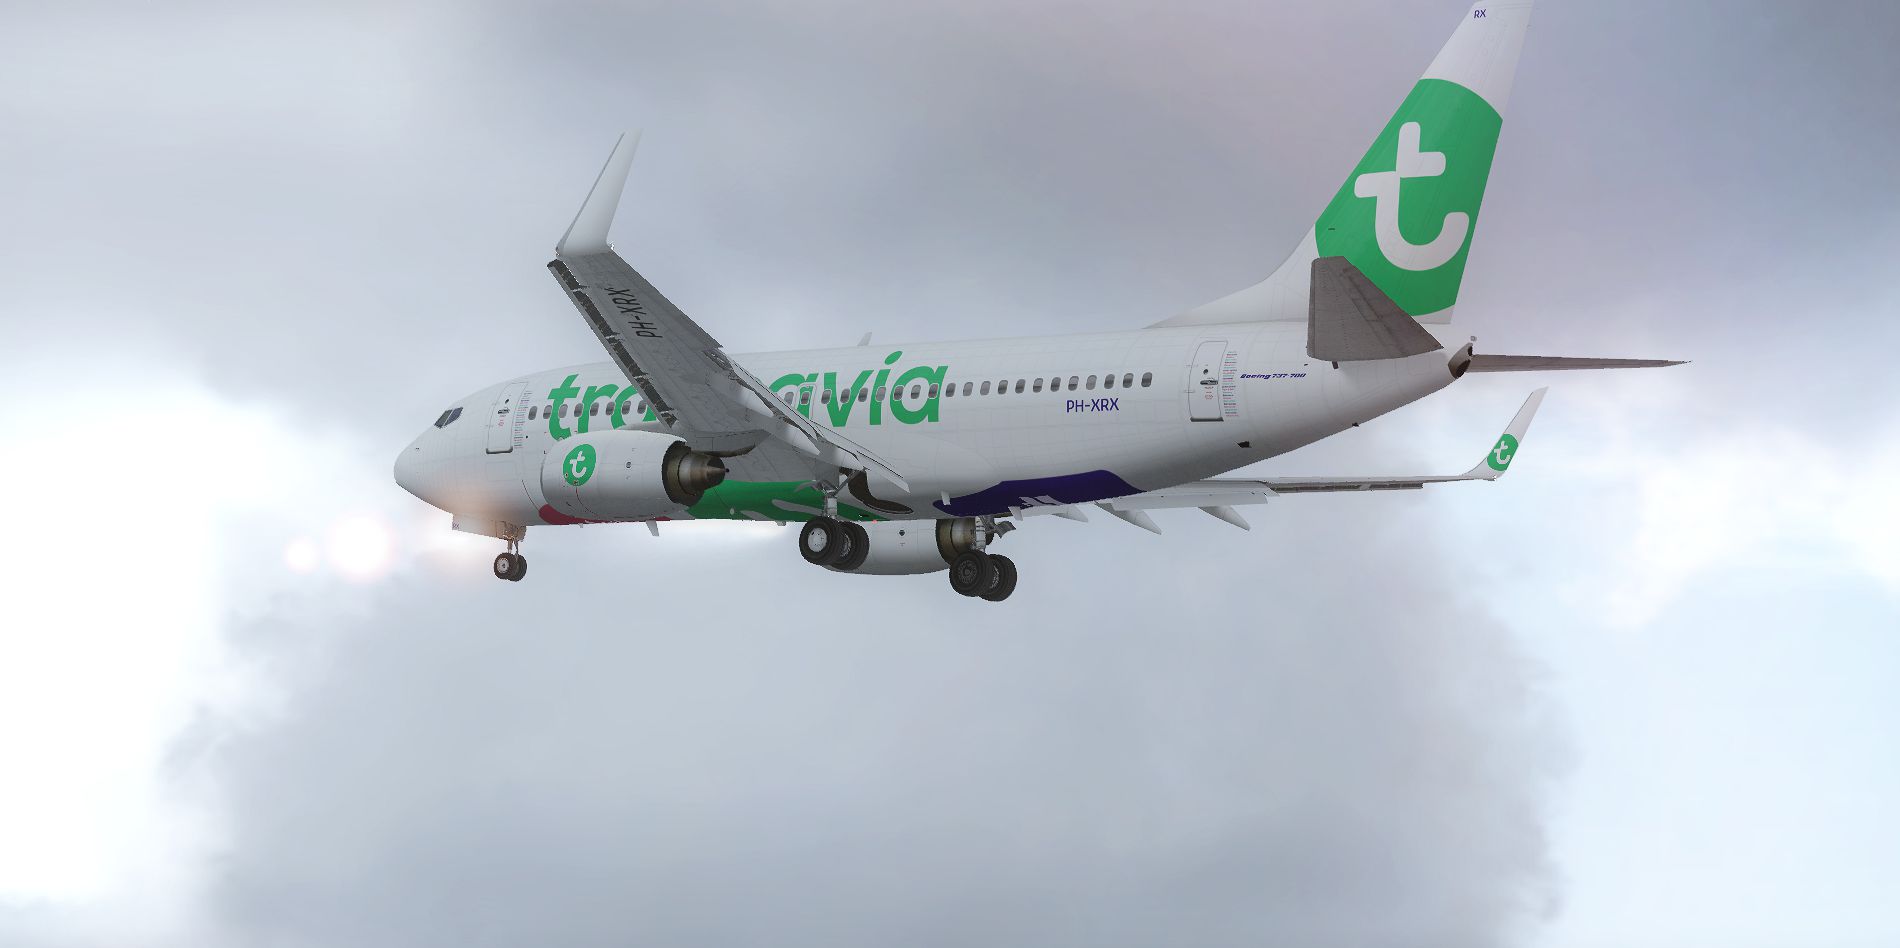 Gallery of 737 800 Fsx Texture.